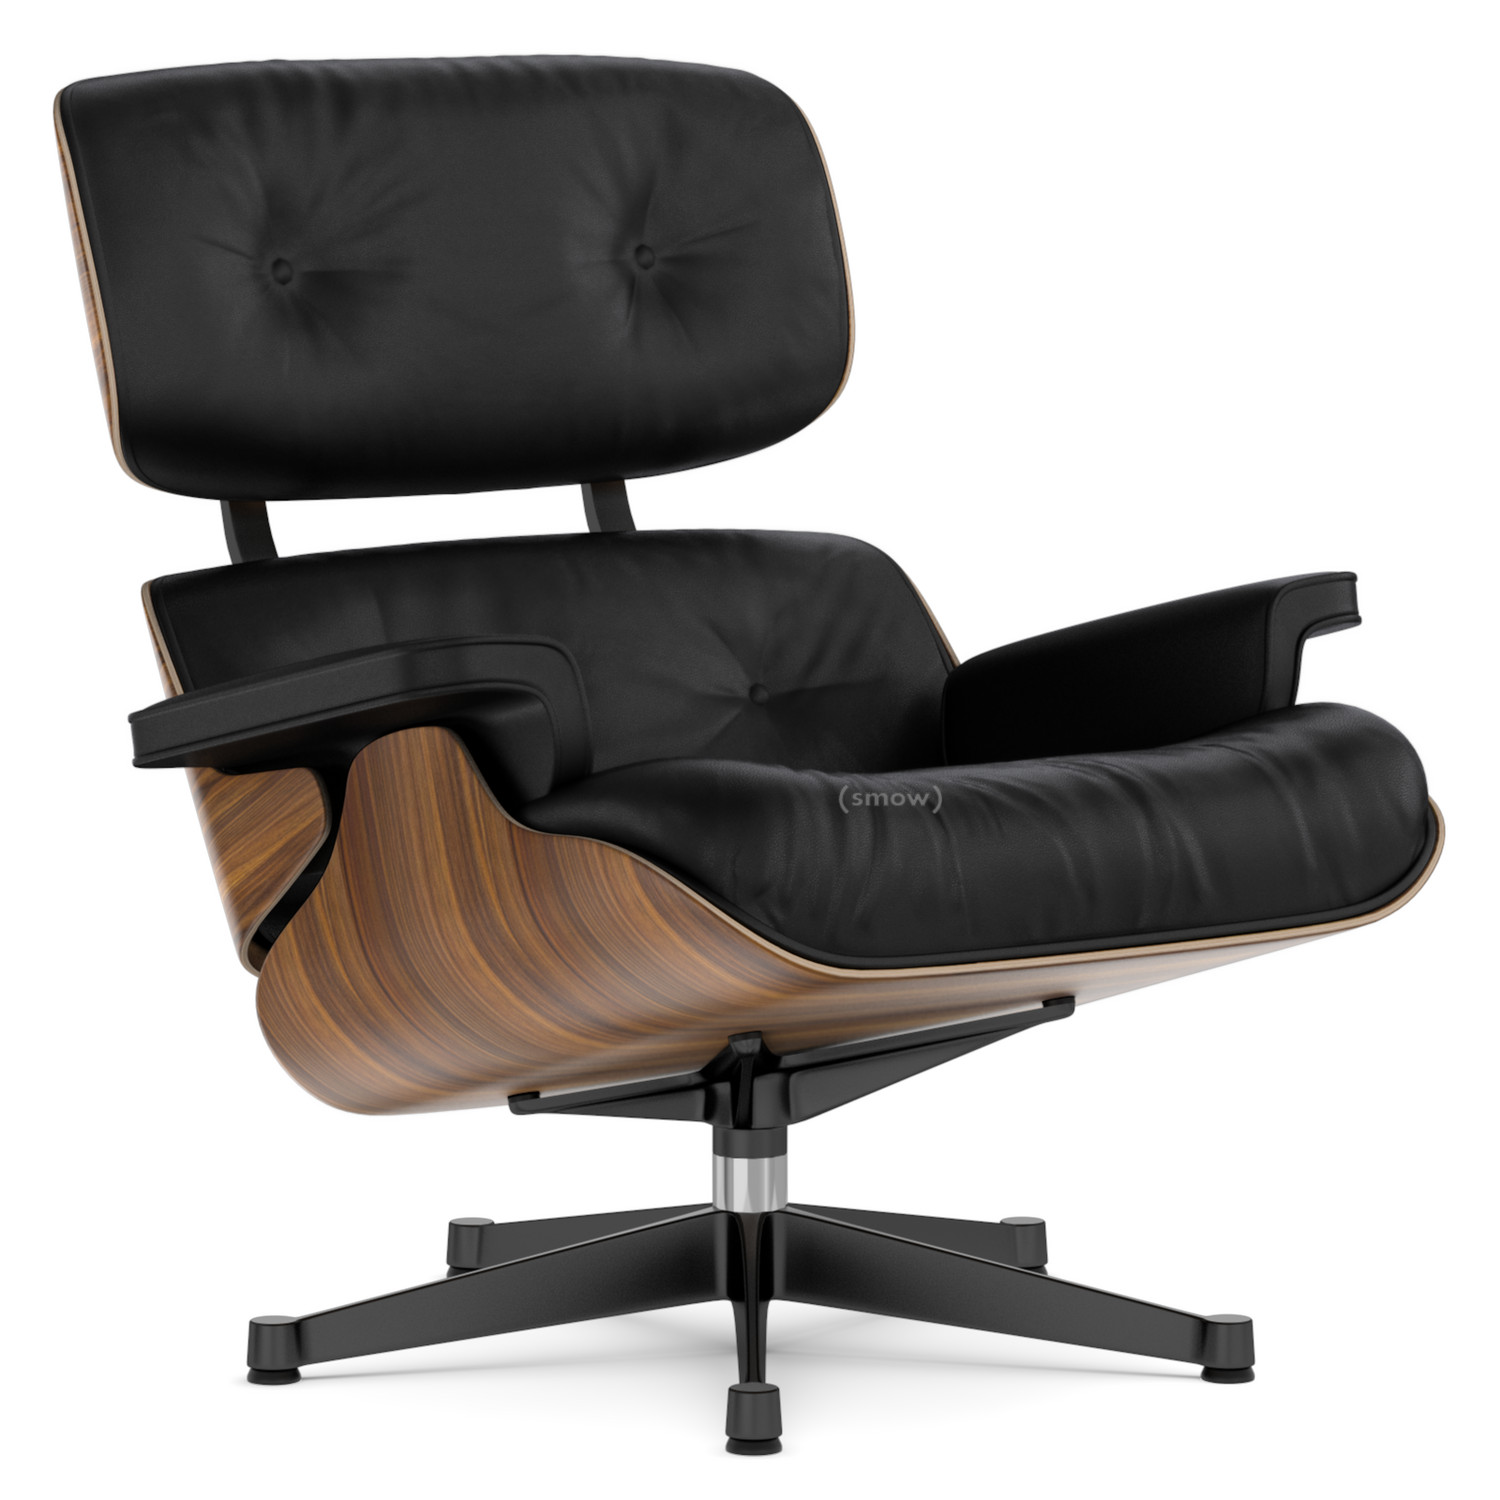 lever Keer terug Koe Vitra Lounge Chair by Charles & Ray Eames, 1956 - Designer furniture by  smow.com